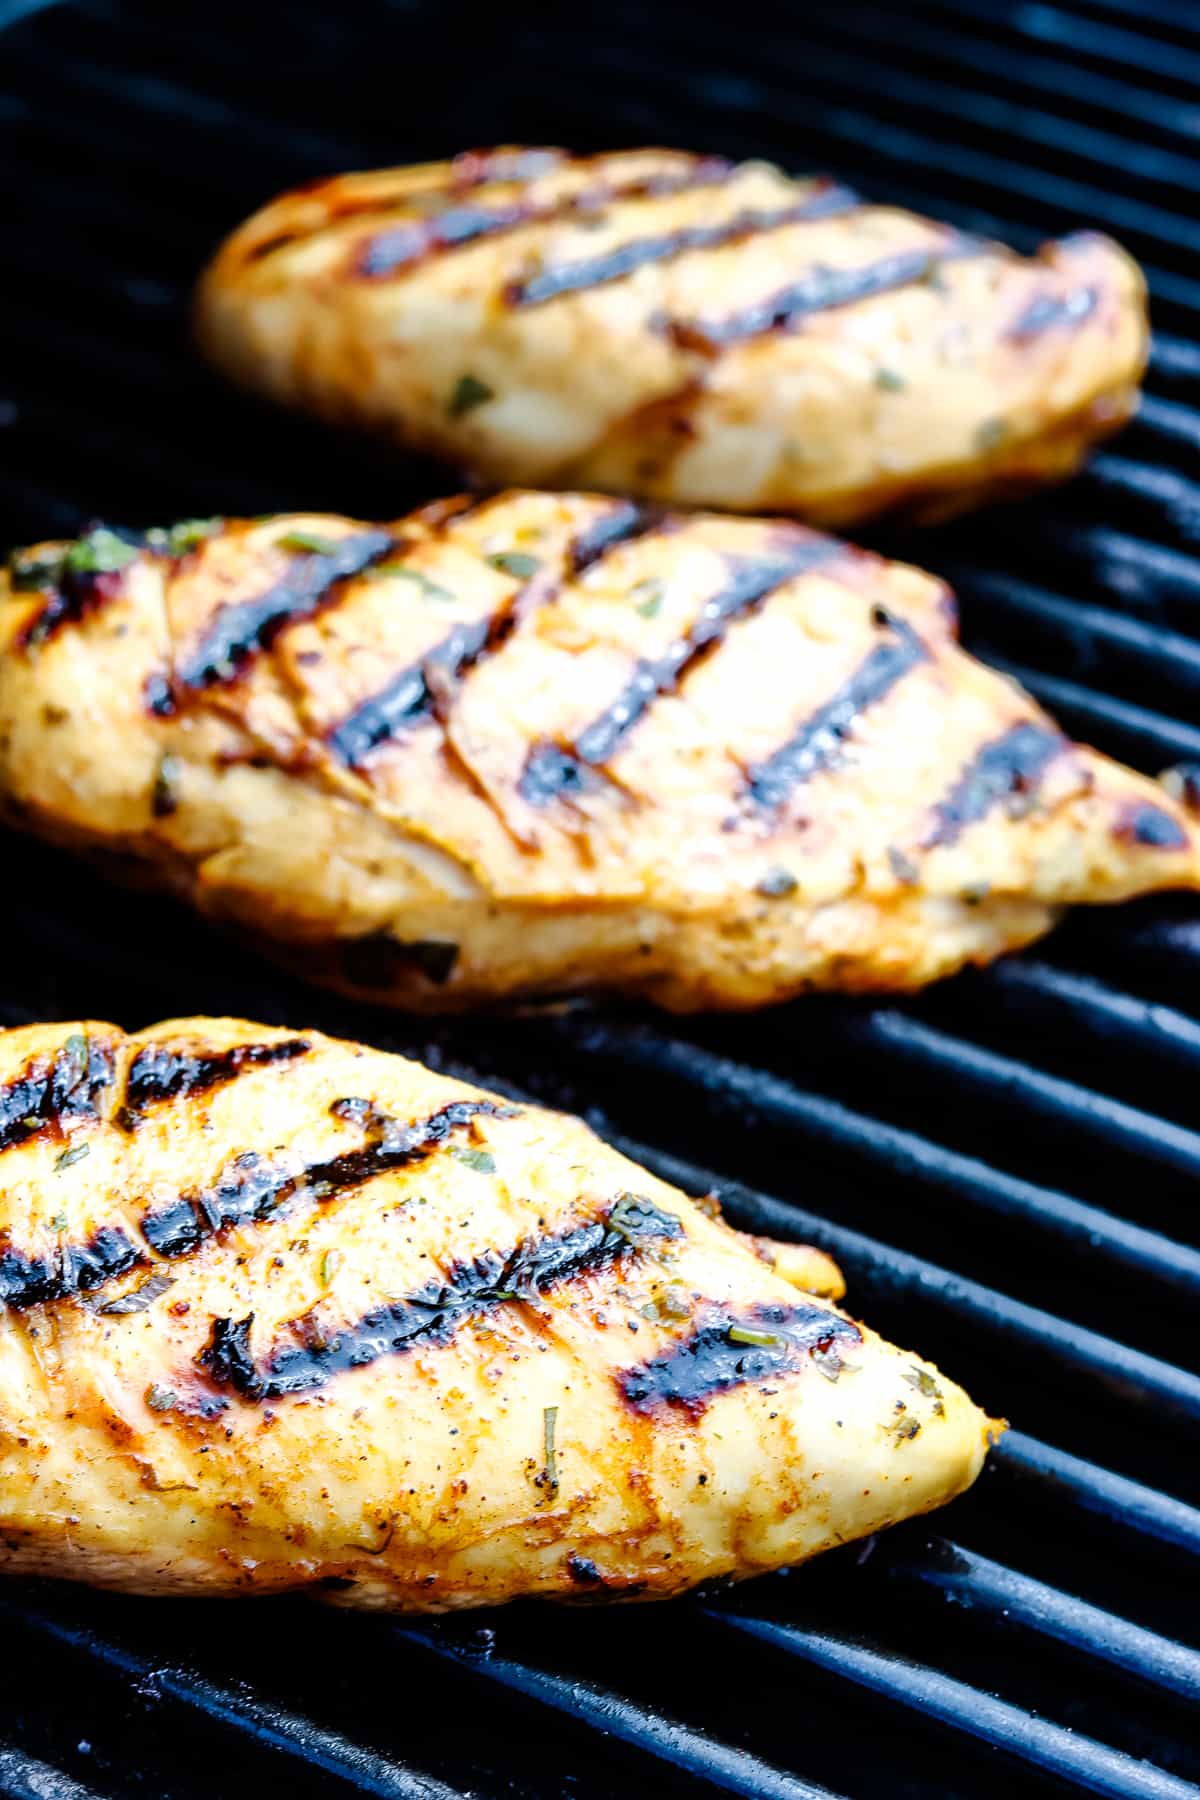 Chicken breasts on grill with grill marks